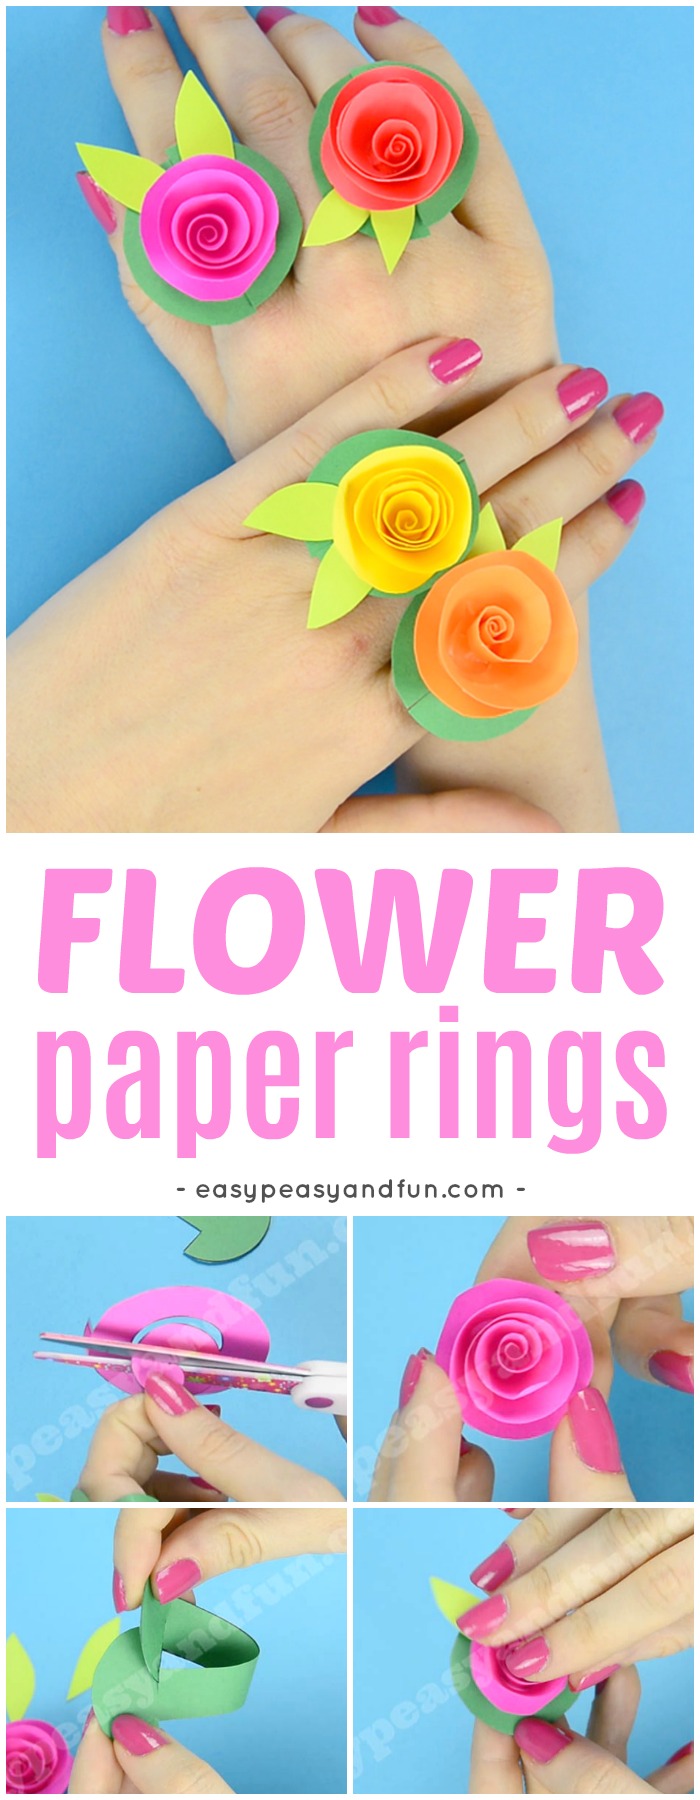 Beautiful Flower Paper Rings Spring Crafts for Kids with Printable Templates #flowercrafts #Springcrafts #papercrafts